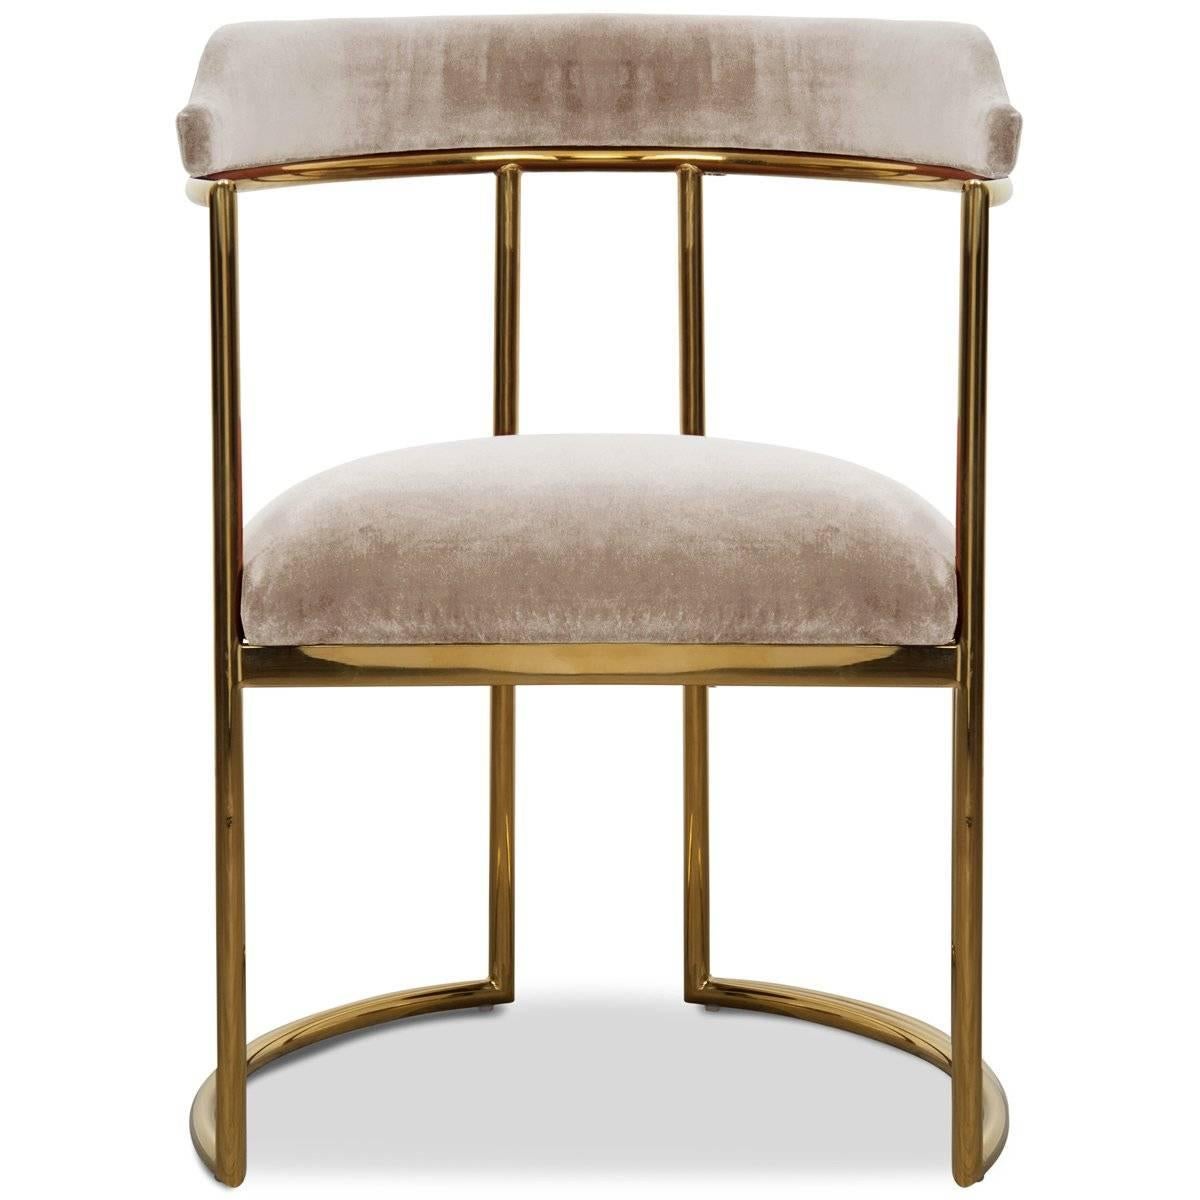 Meet the Acapulco 2 dining chair, the newest version of the popular Acapulco Dining Chair. As the perfect accent for your modern dining room, the Acapulco 2 is upholstered in your choice of colored velvet with beautifully curved brass legs and a